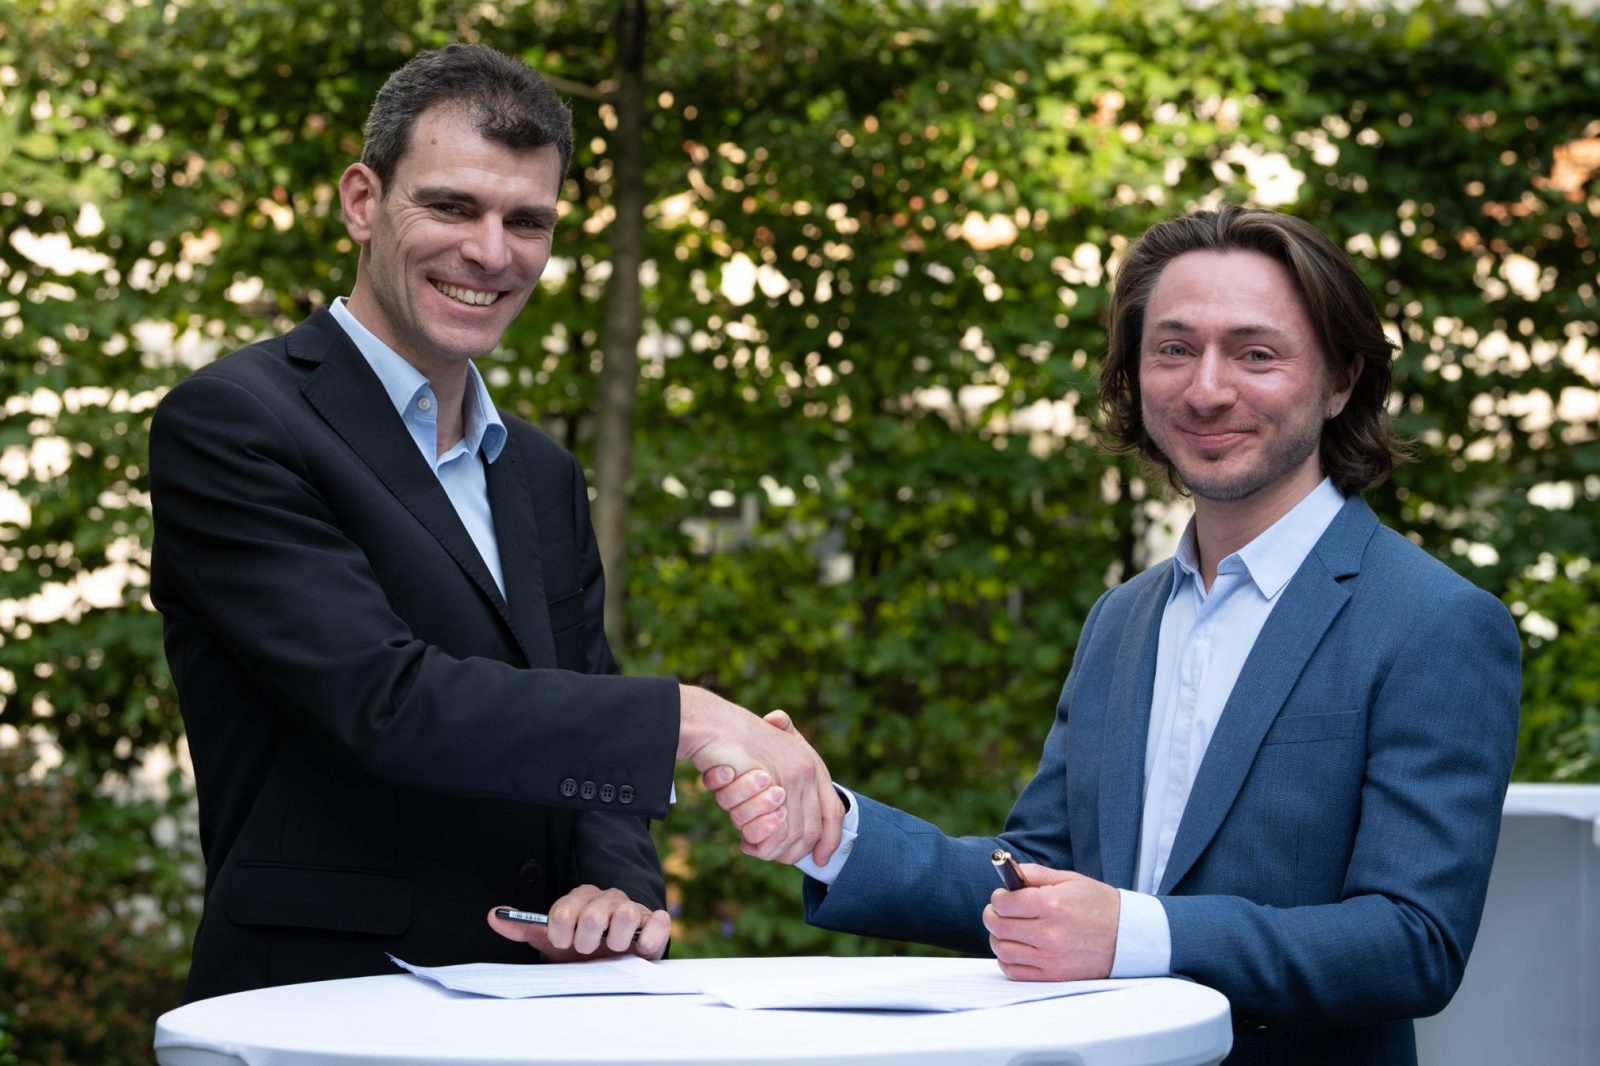 Pasqal CEO and C-founder Georges-Olivier Reymond (left) and Welinq CEO & Co-founder Tom Darras (right) have aligned their companies toward the common goal of interconnected, multi-QPU systems. (Source: Pasqal)